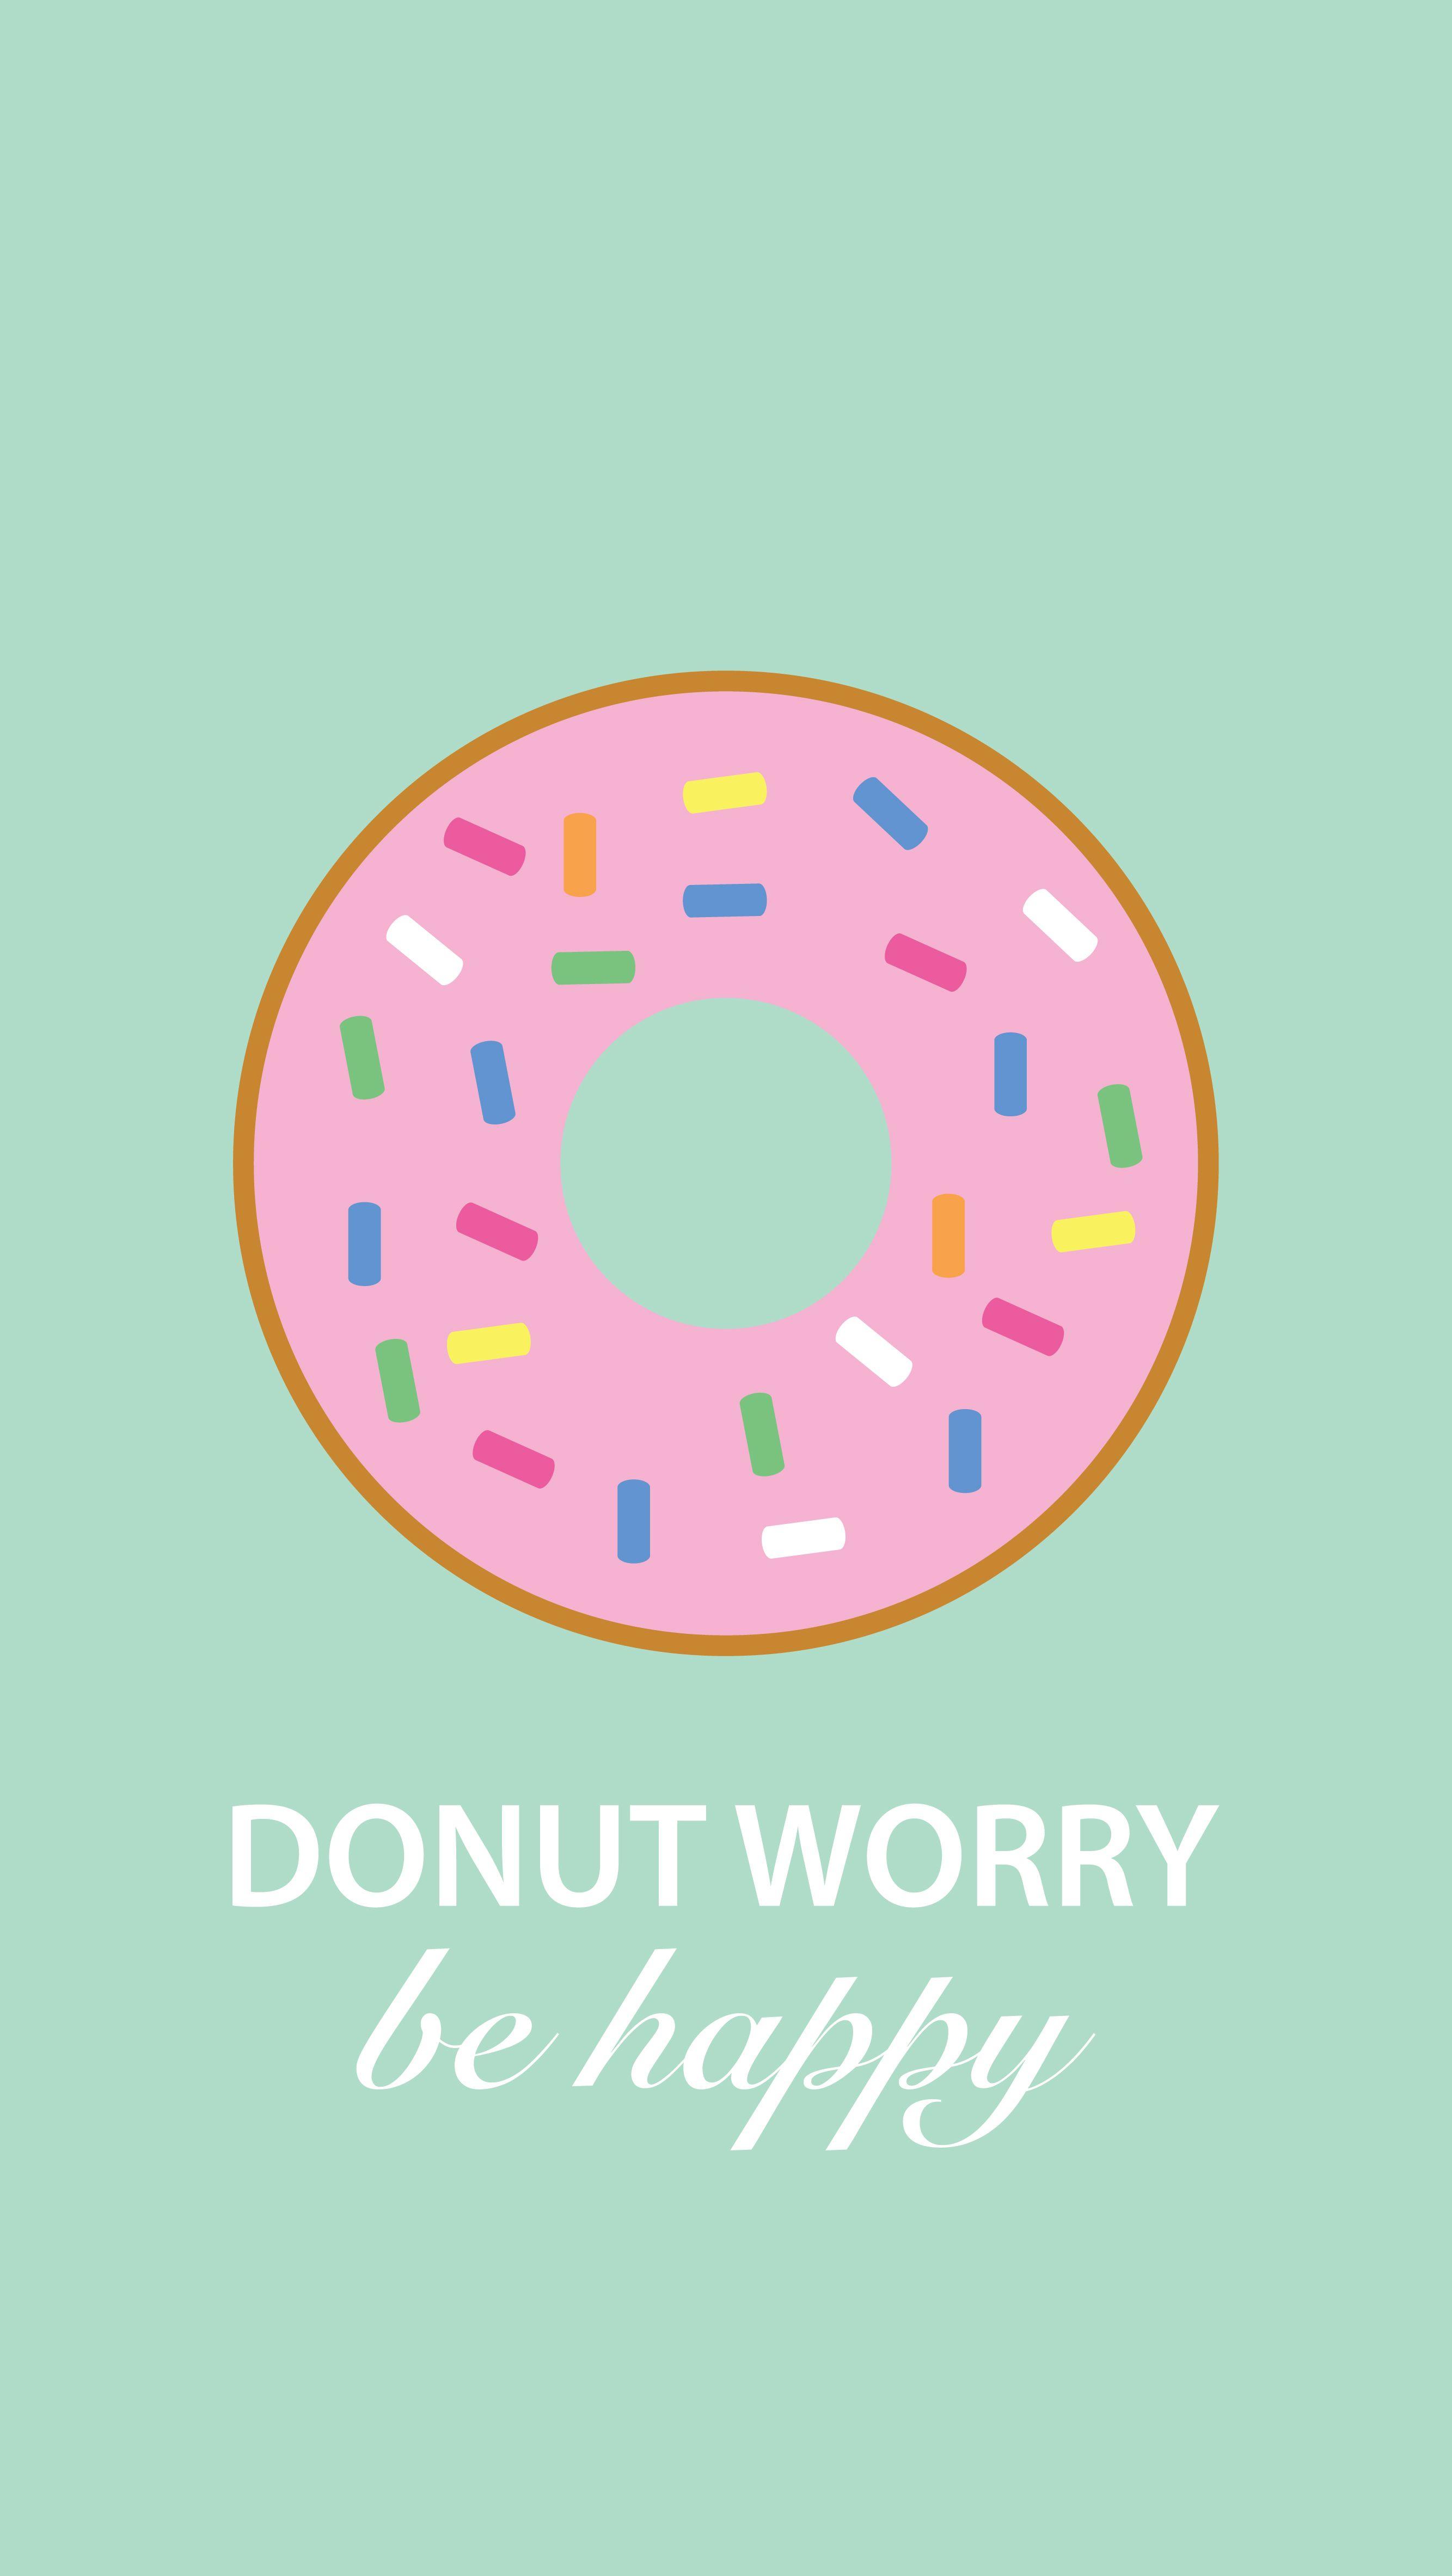 Donut Worry free wallpaper download for your iphone, laptop & ipad